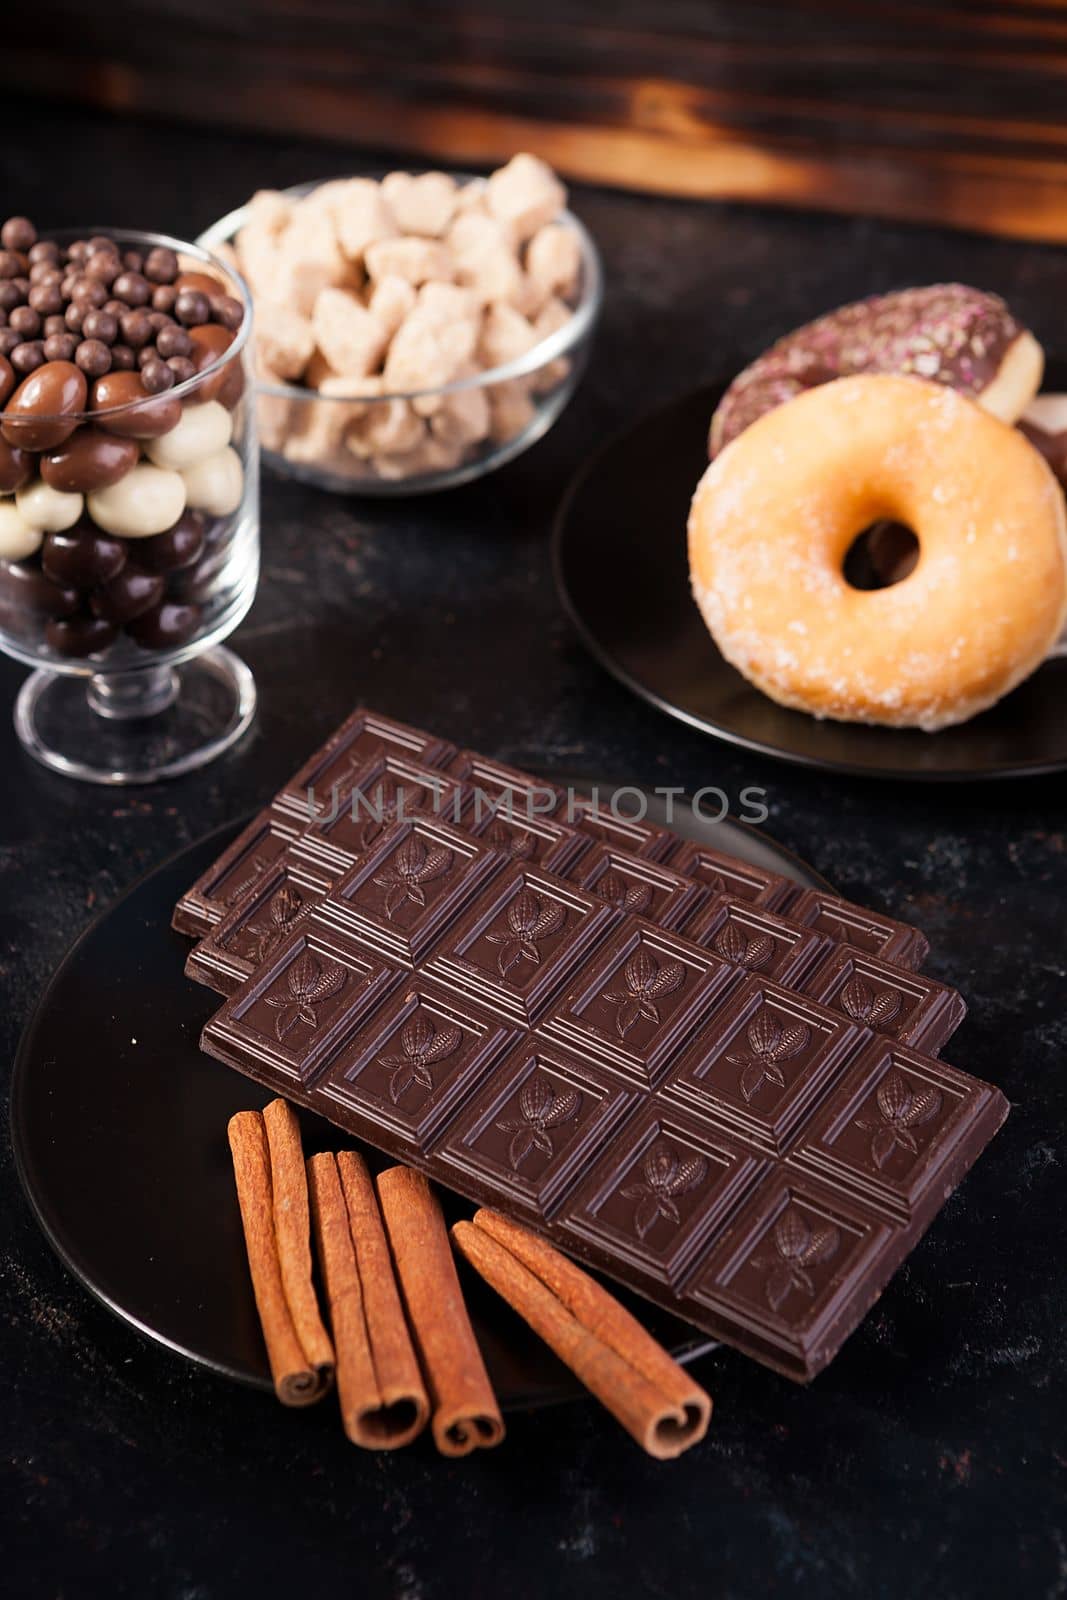 Top view of chocolate tablets, donuts, brown sugar with peanuts in chocolate and coffee beans by DCStudio